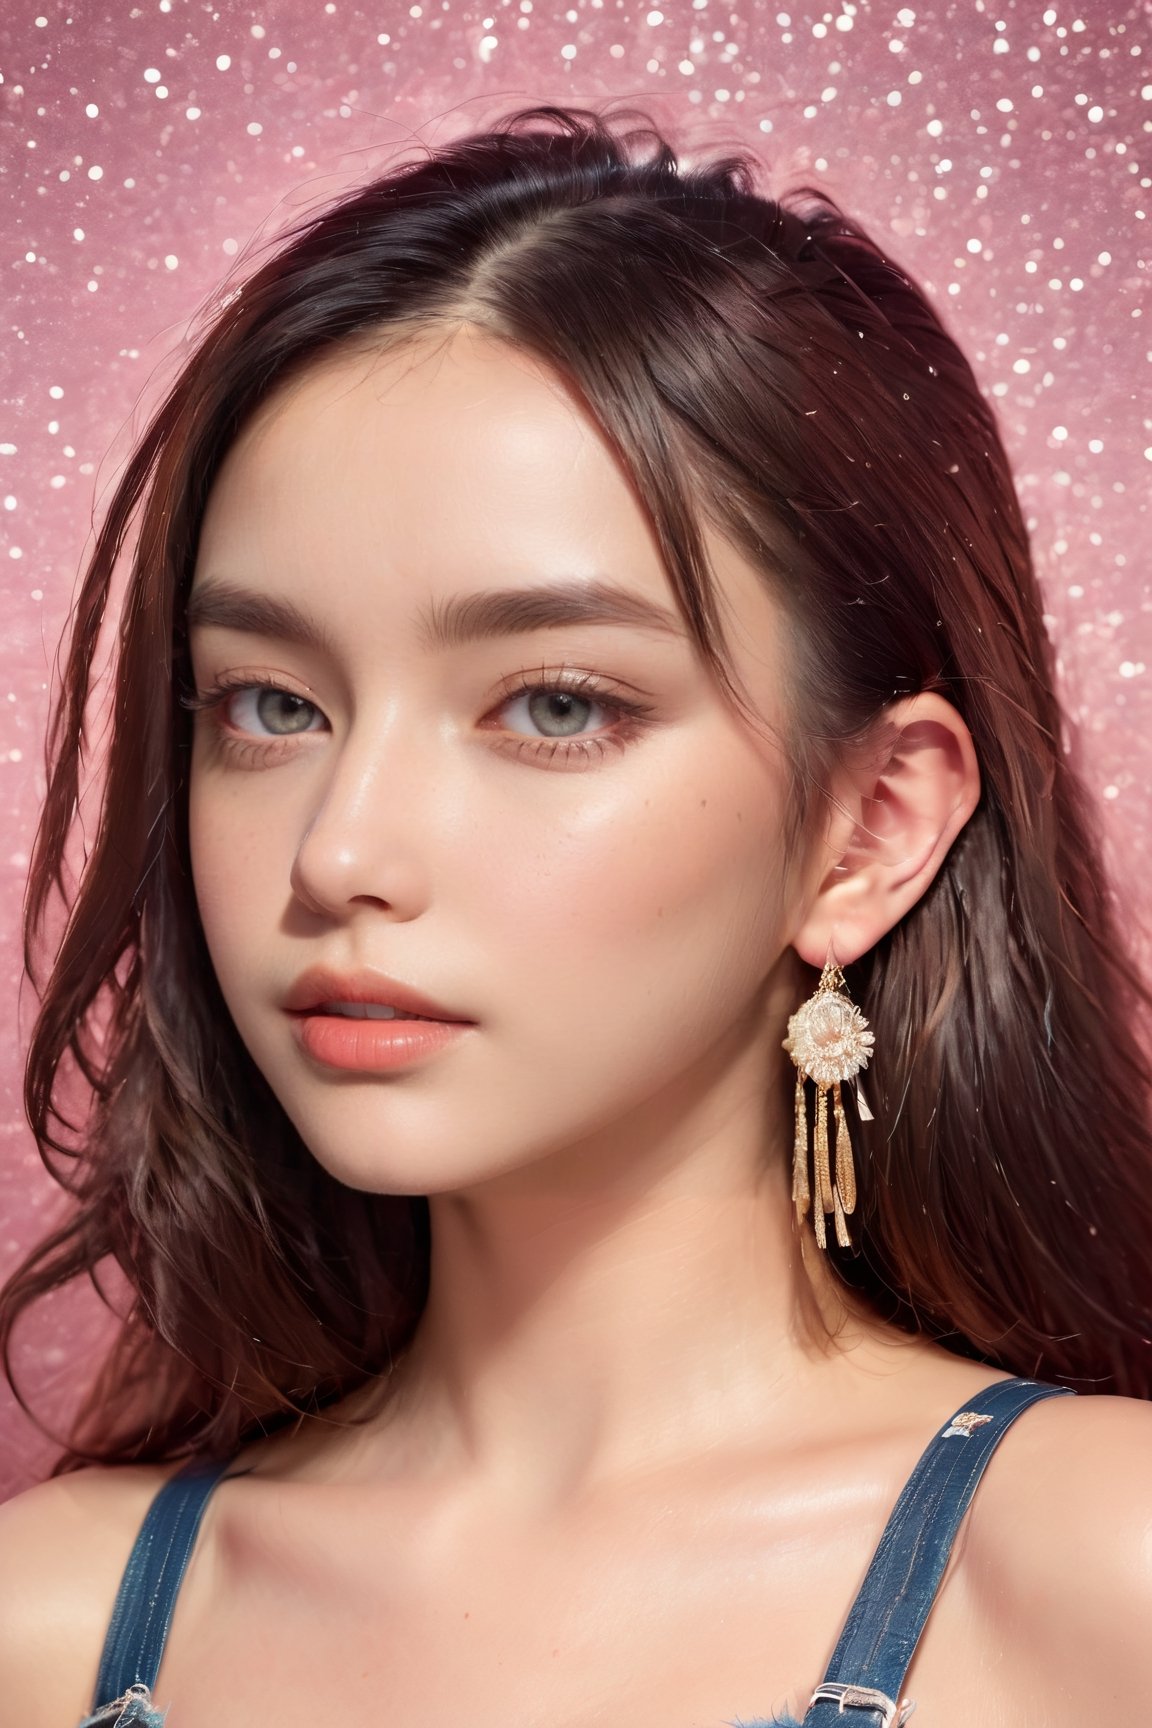 (glamour_photo:1.3) of a beautiful young model\(woman, girl\), (preteen:1.4), 1girl, (blush:0.5), (goosebumps, blemishes:0.5), subsurface scattering, detailed skin texture, textured skin, realistic dull skin noise, visible skin detail, skin fuzz, dry skin, perfect fingers & hands, realistic fingernails, feminine tone, absolute_cleavage, BREAK wearing Fringed crop top and frayed denim skirt, exposed_navel, BREAK RAW Photo, (photorealistic, photorealism, realistic:1.3), SFW, (upper_body framing from hips:1.4), Sexy_Pose, (New_Year:1.4), shot on ALEXA 65 camera, using Fujicolor Pro Film, Enhanced All,eyes shoot